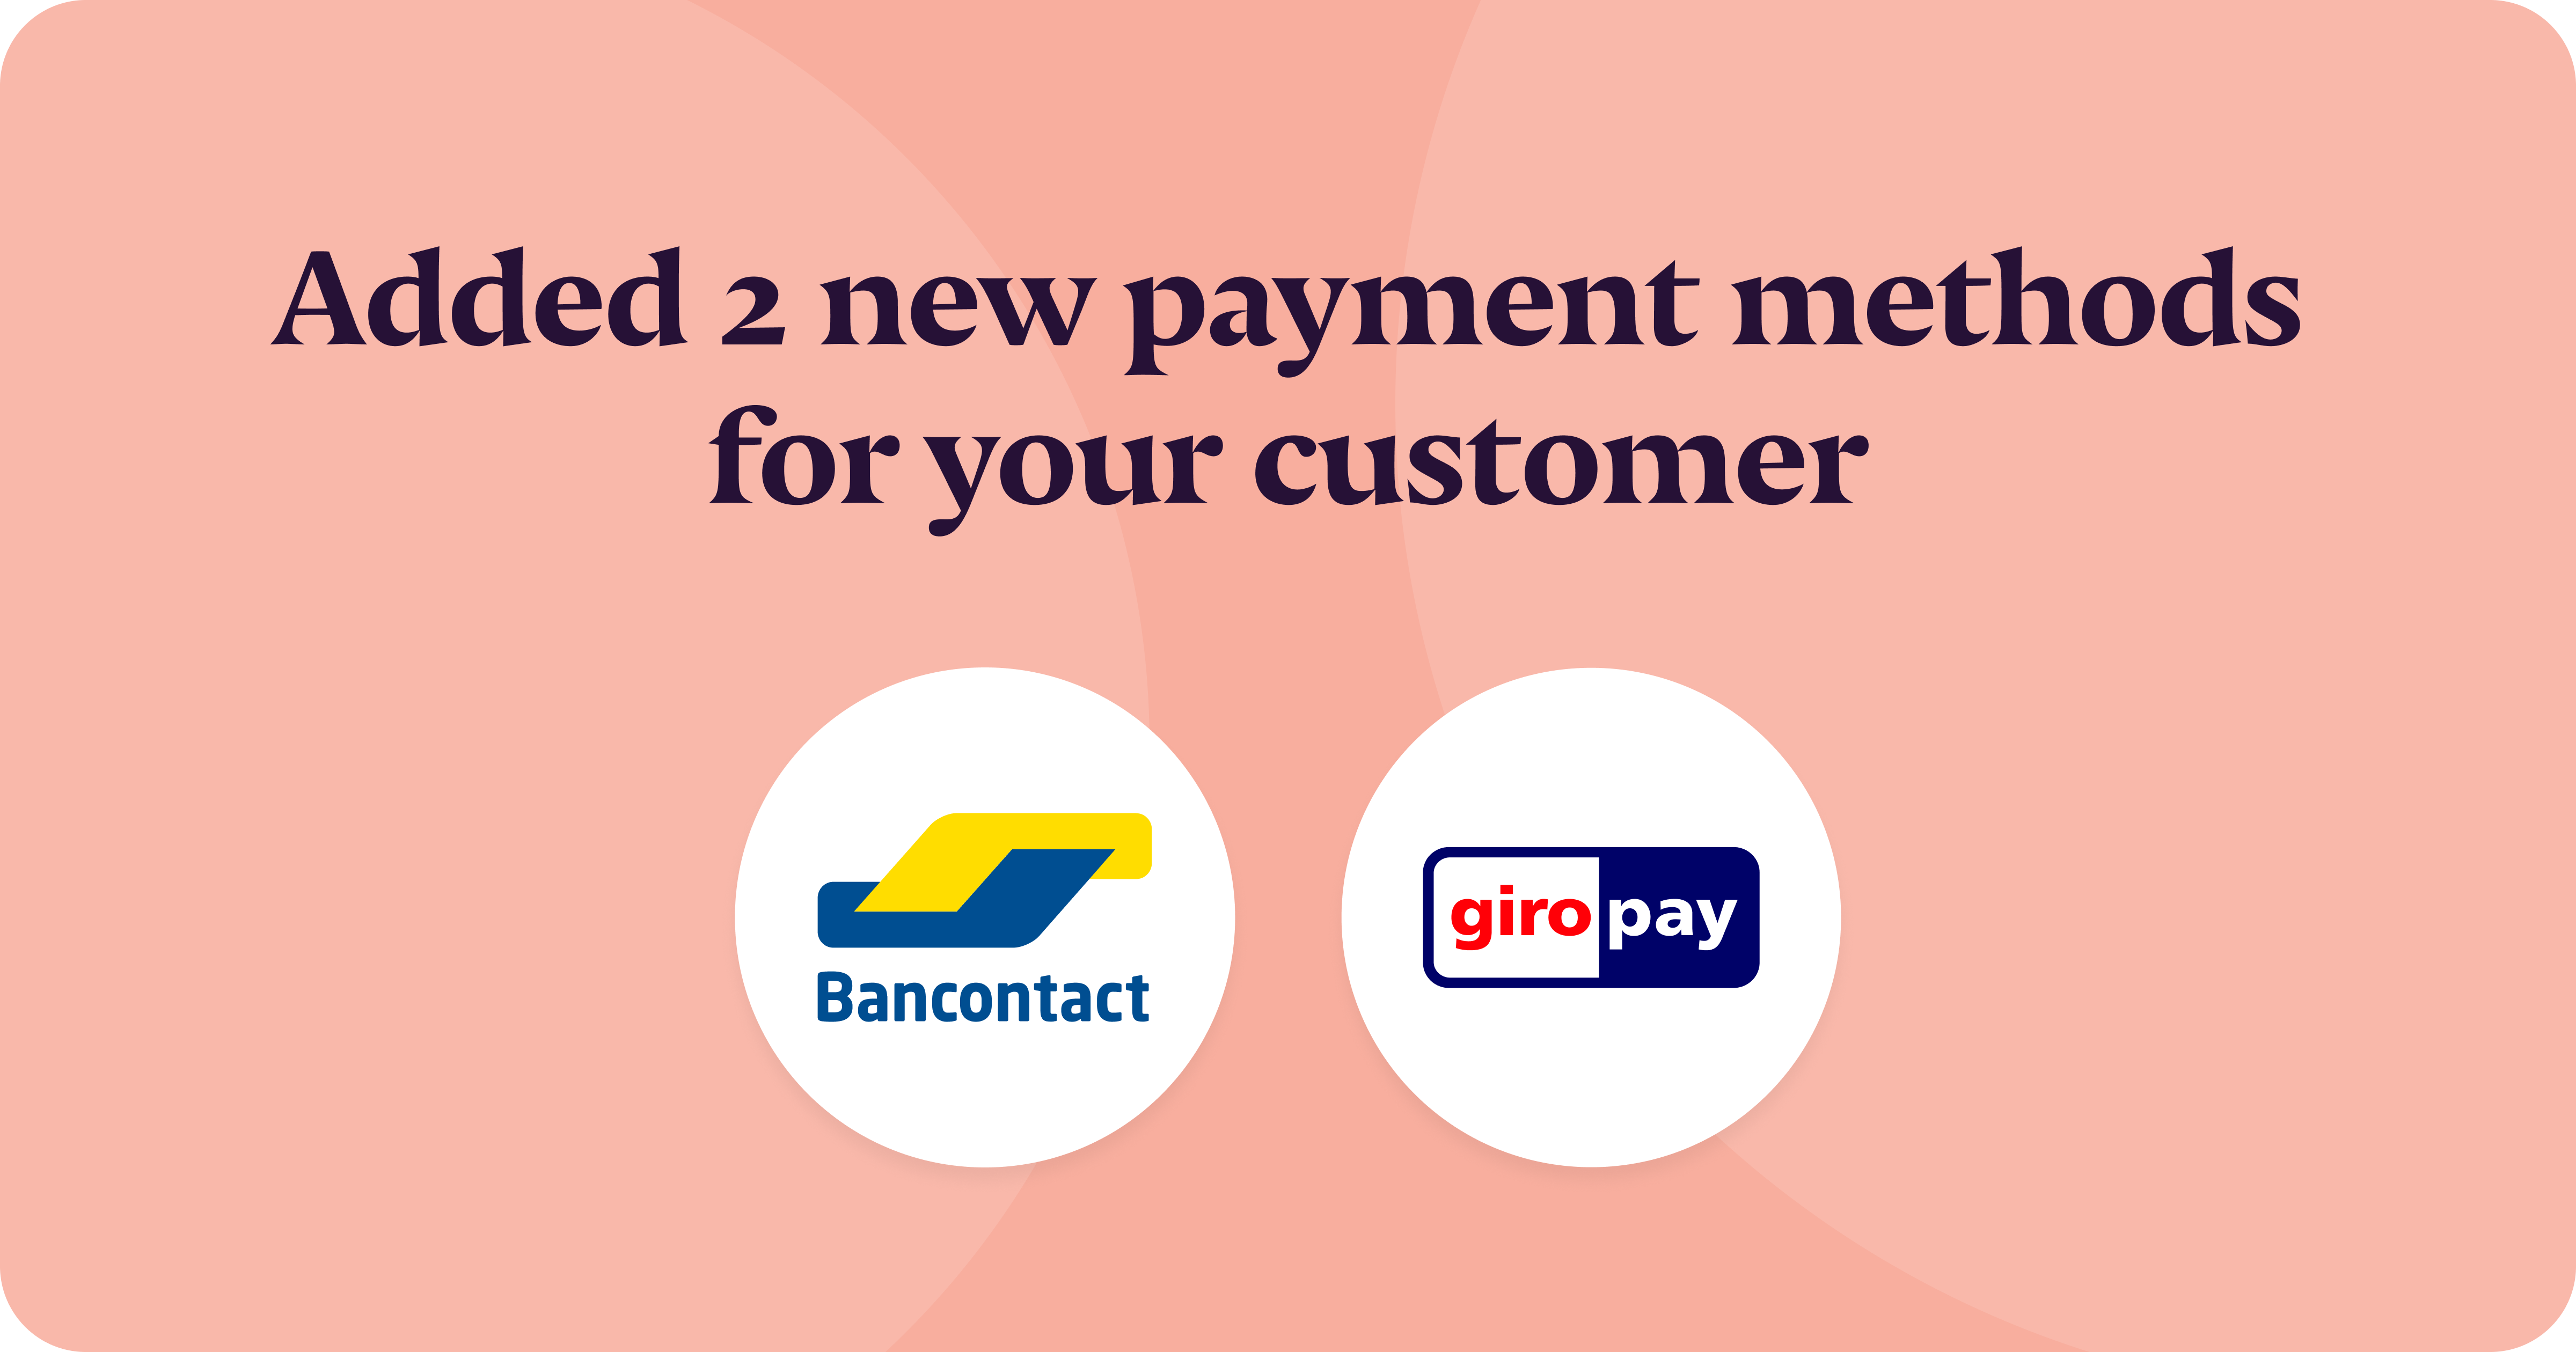 Octoa supporting Bancontact and Giropay